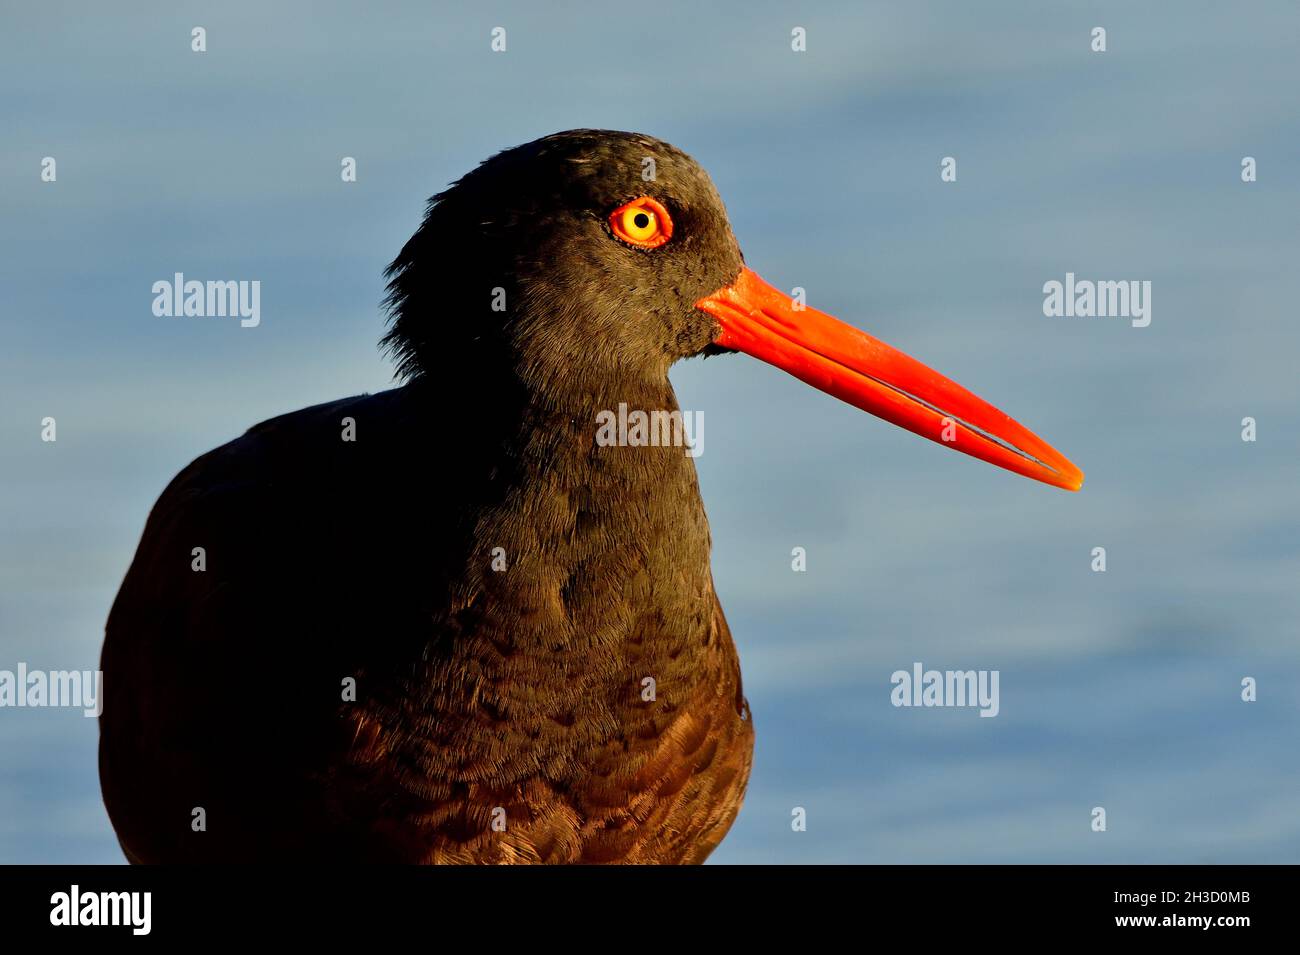 A portrait image of a Black Oystercatcher shorebird (Haematopus bachmani)  in the early morning light foraging  on the shore of Vancouver Island Stock Photo